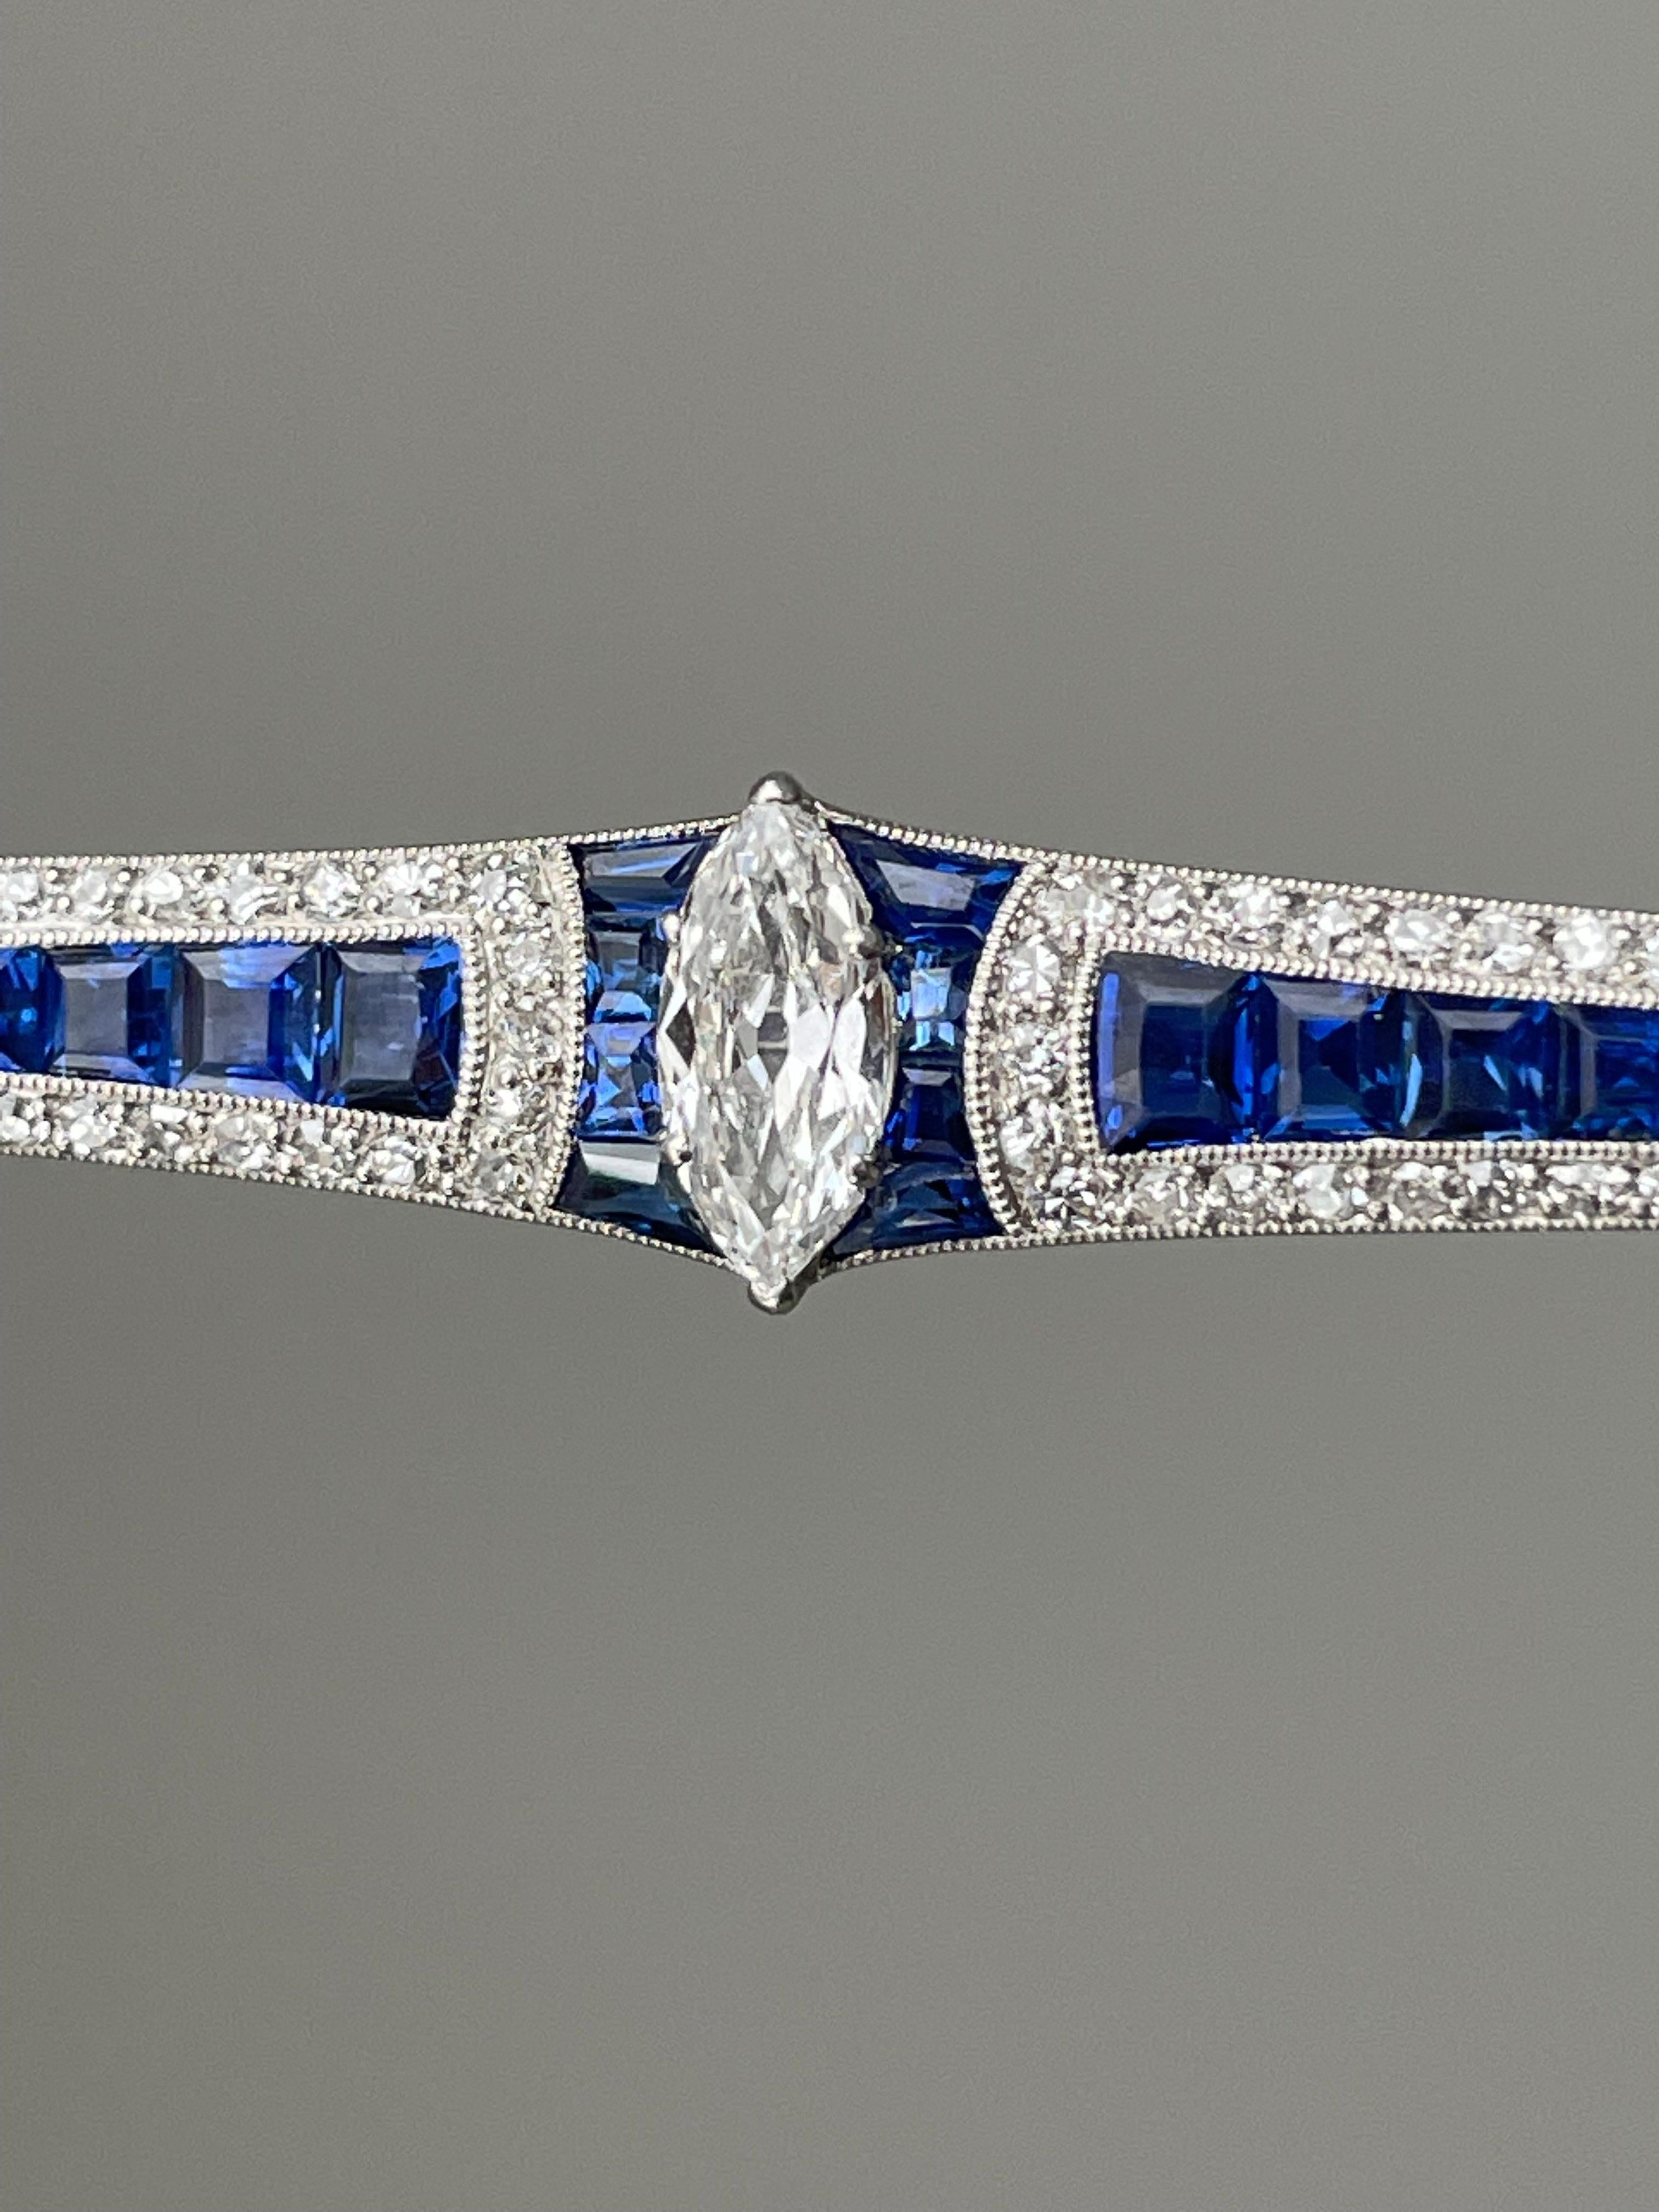 Both elegant and pristine, this French Art Deco brooch centers on a scintillating .85 carat (VS1 / G-H) marquise-cut diamond bordered by seamlessly-set natural blue sapphires that flow into a gently graduated line of brilliant blue sapphires, framed